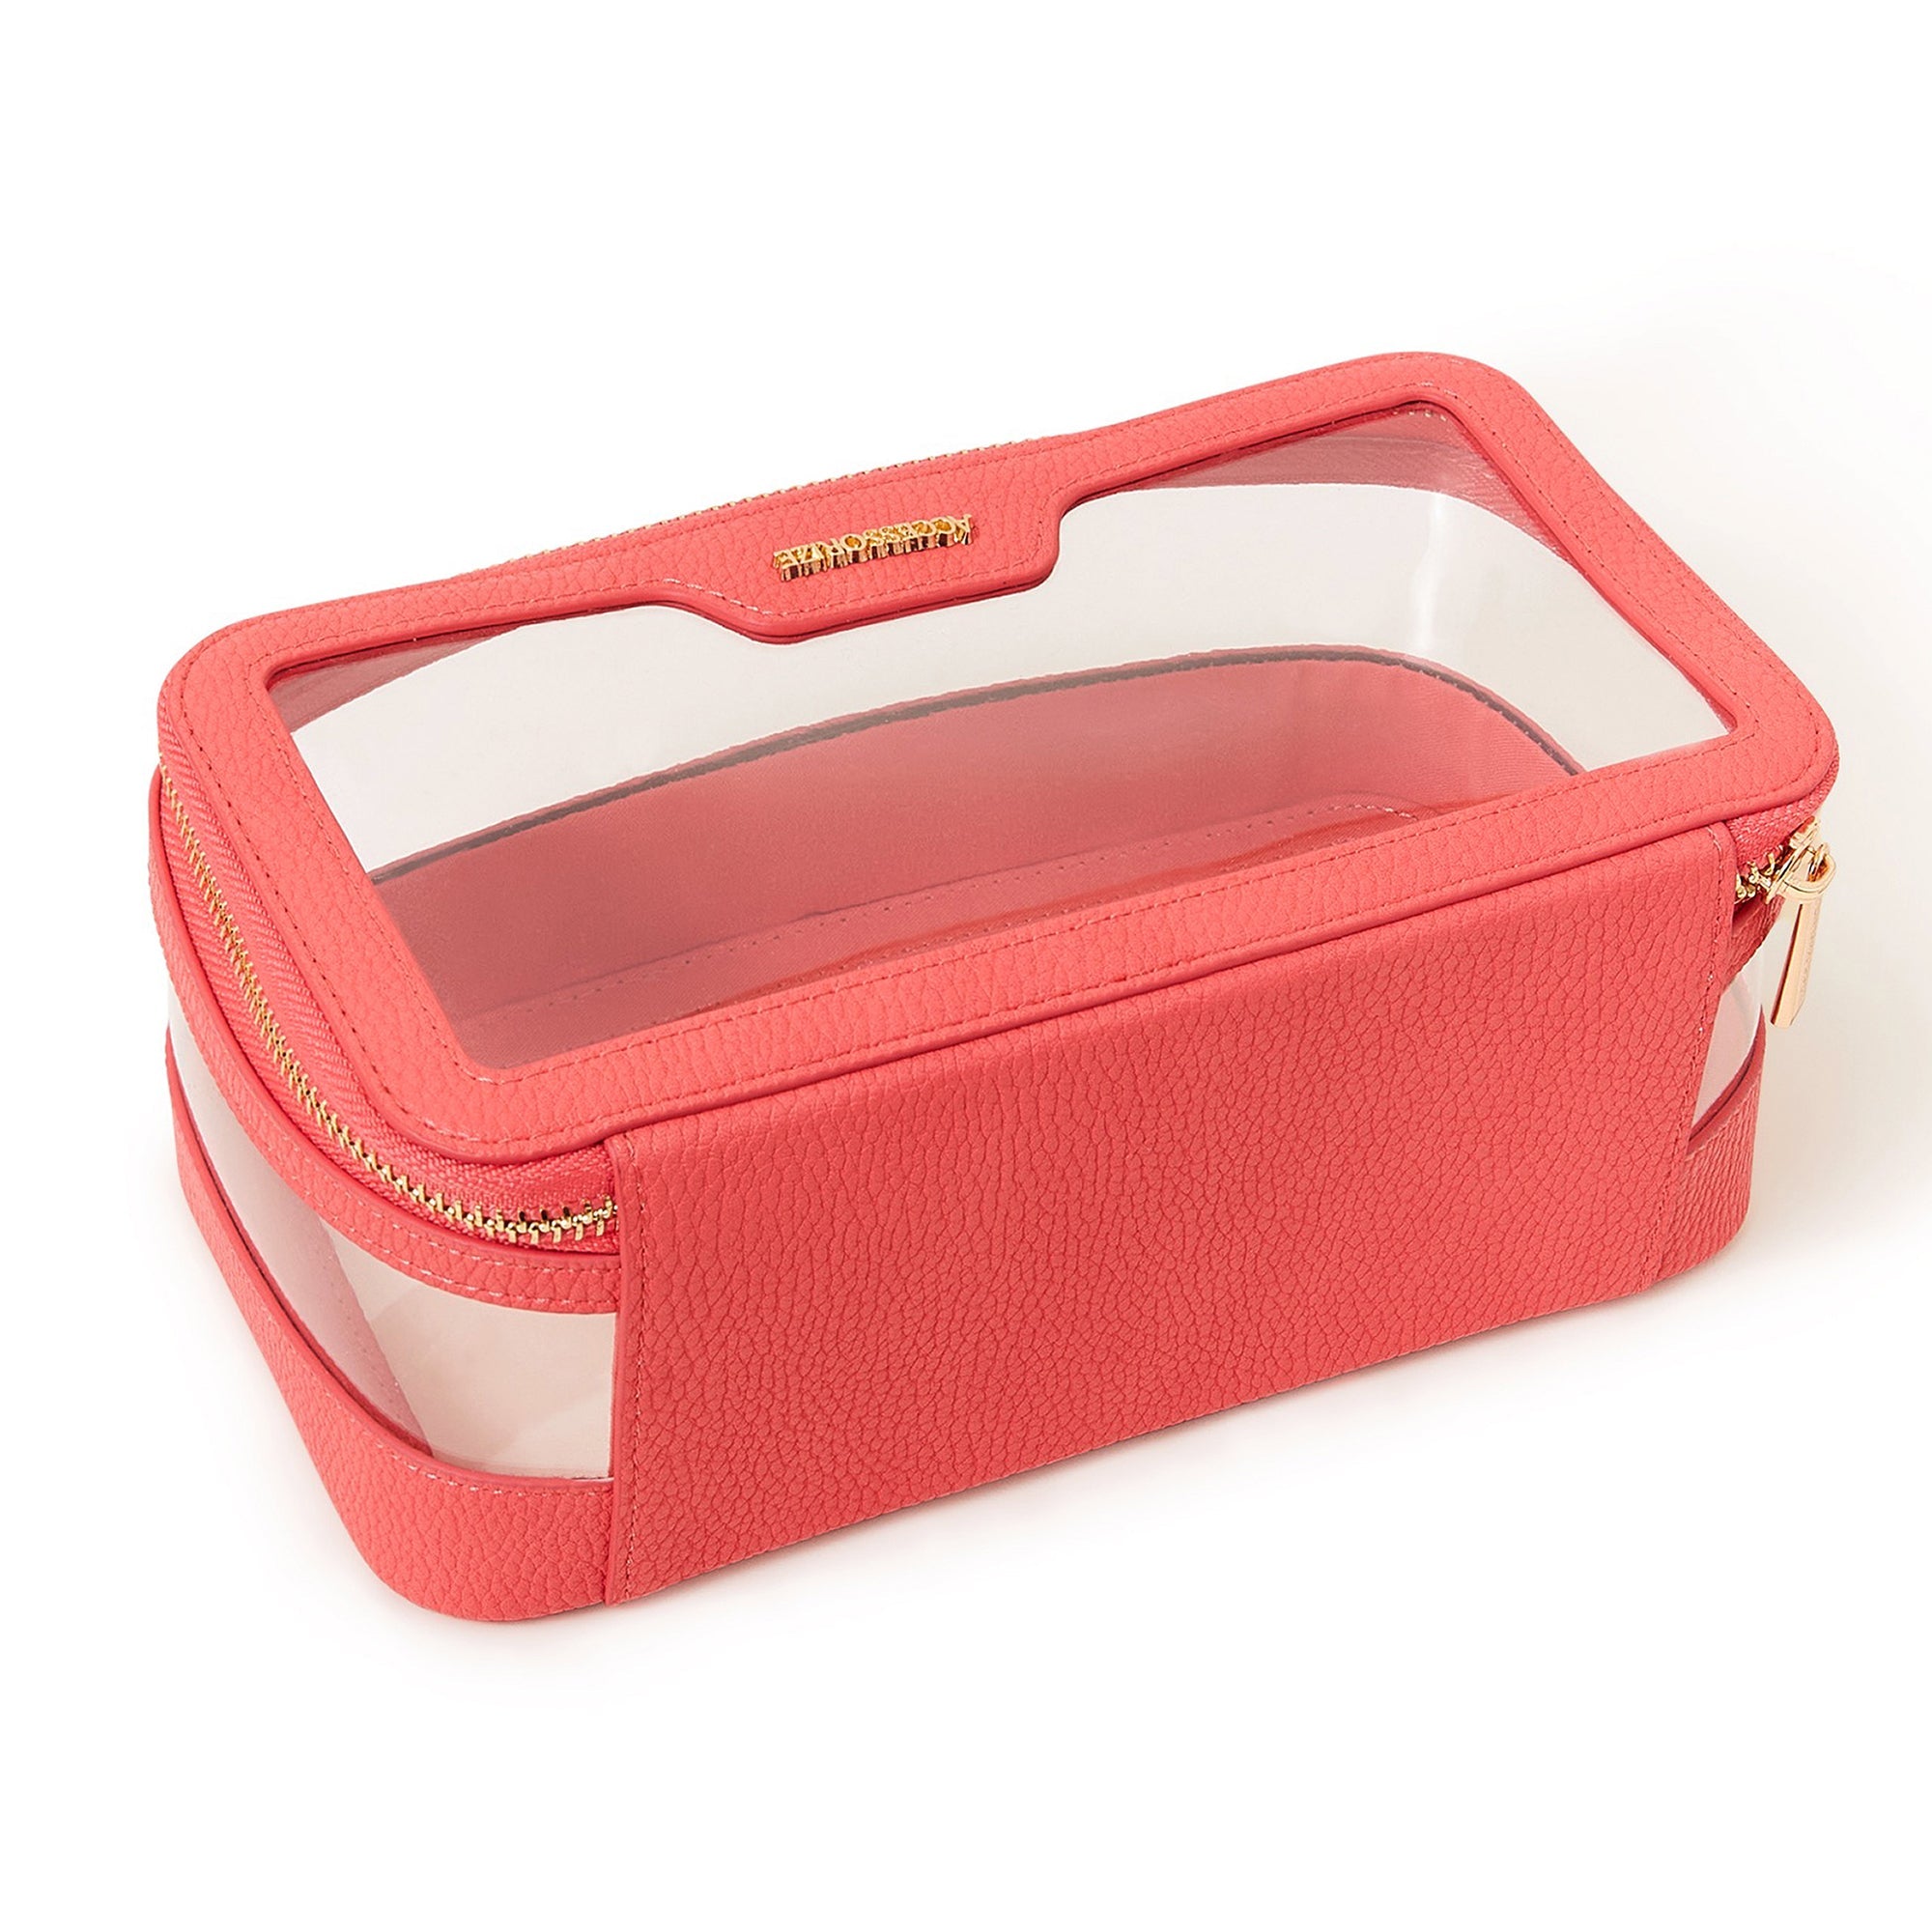 Accessorize London Women's Faux Leather Red Clear Make Up Bag